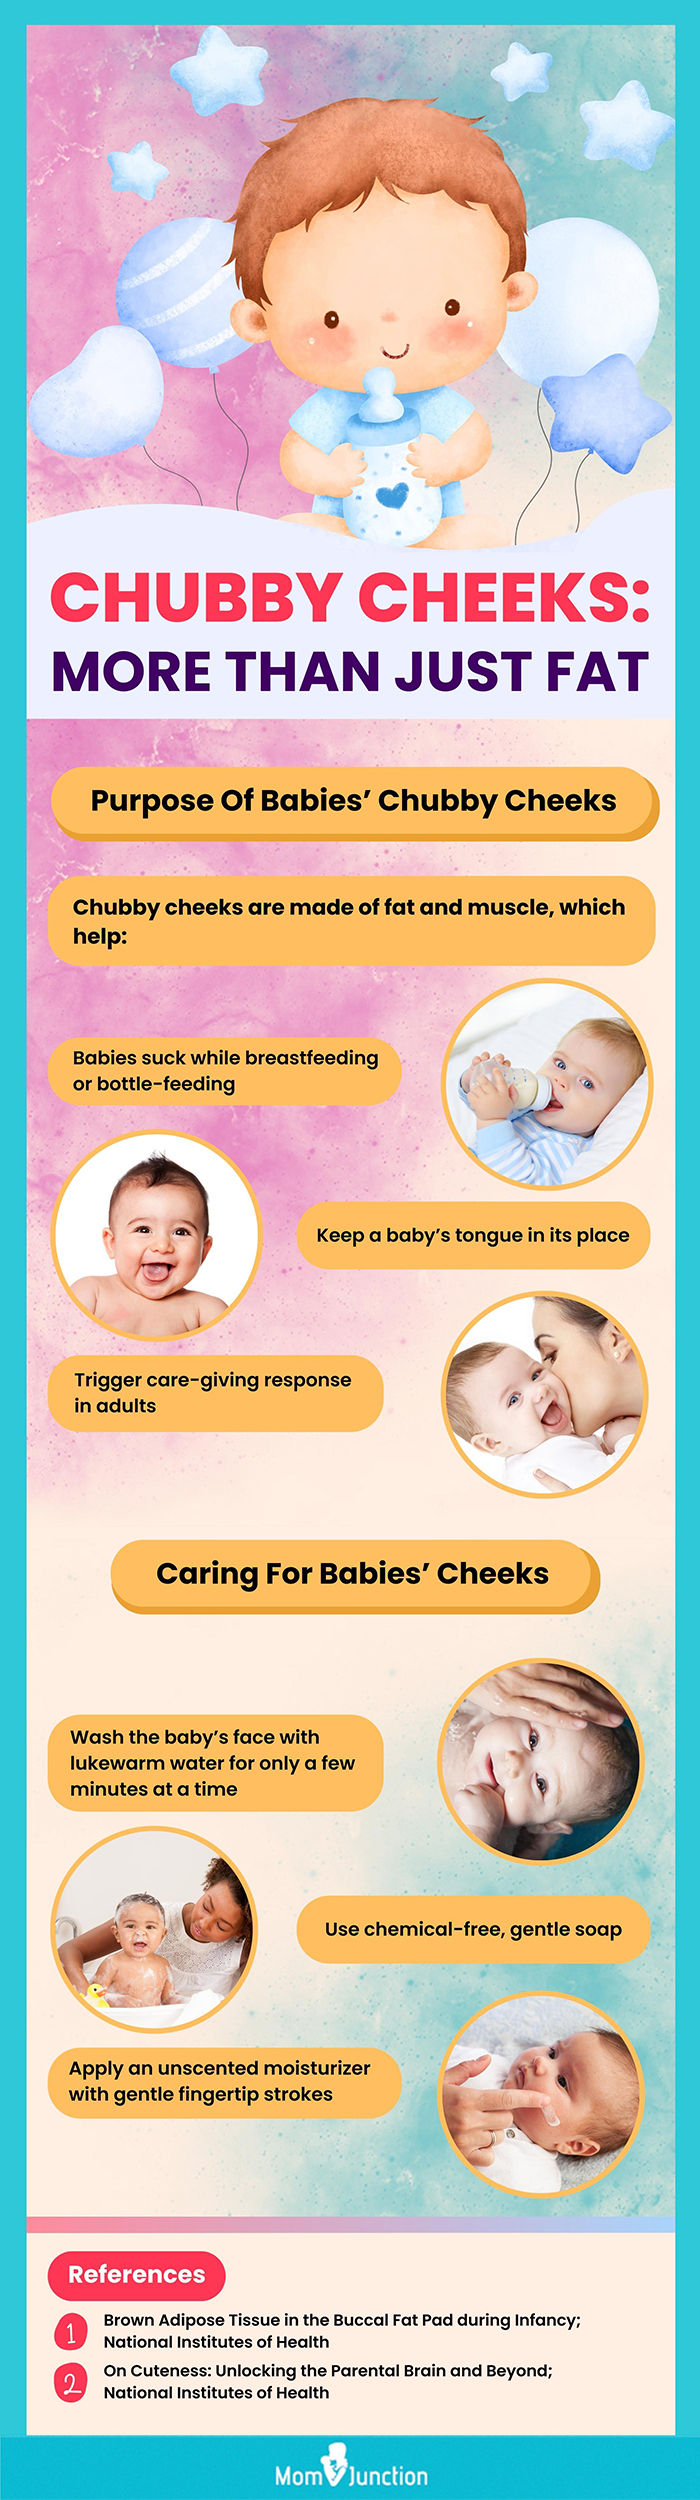 reasons behind baby’s chubby cheeks (infographic)